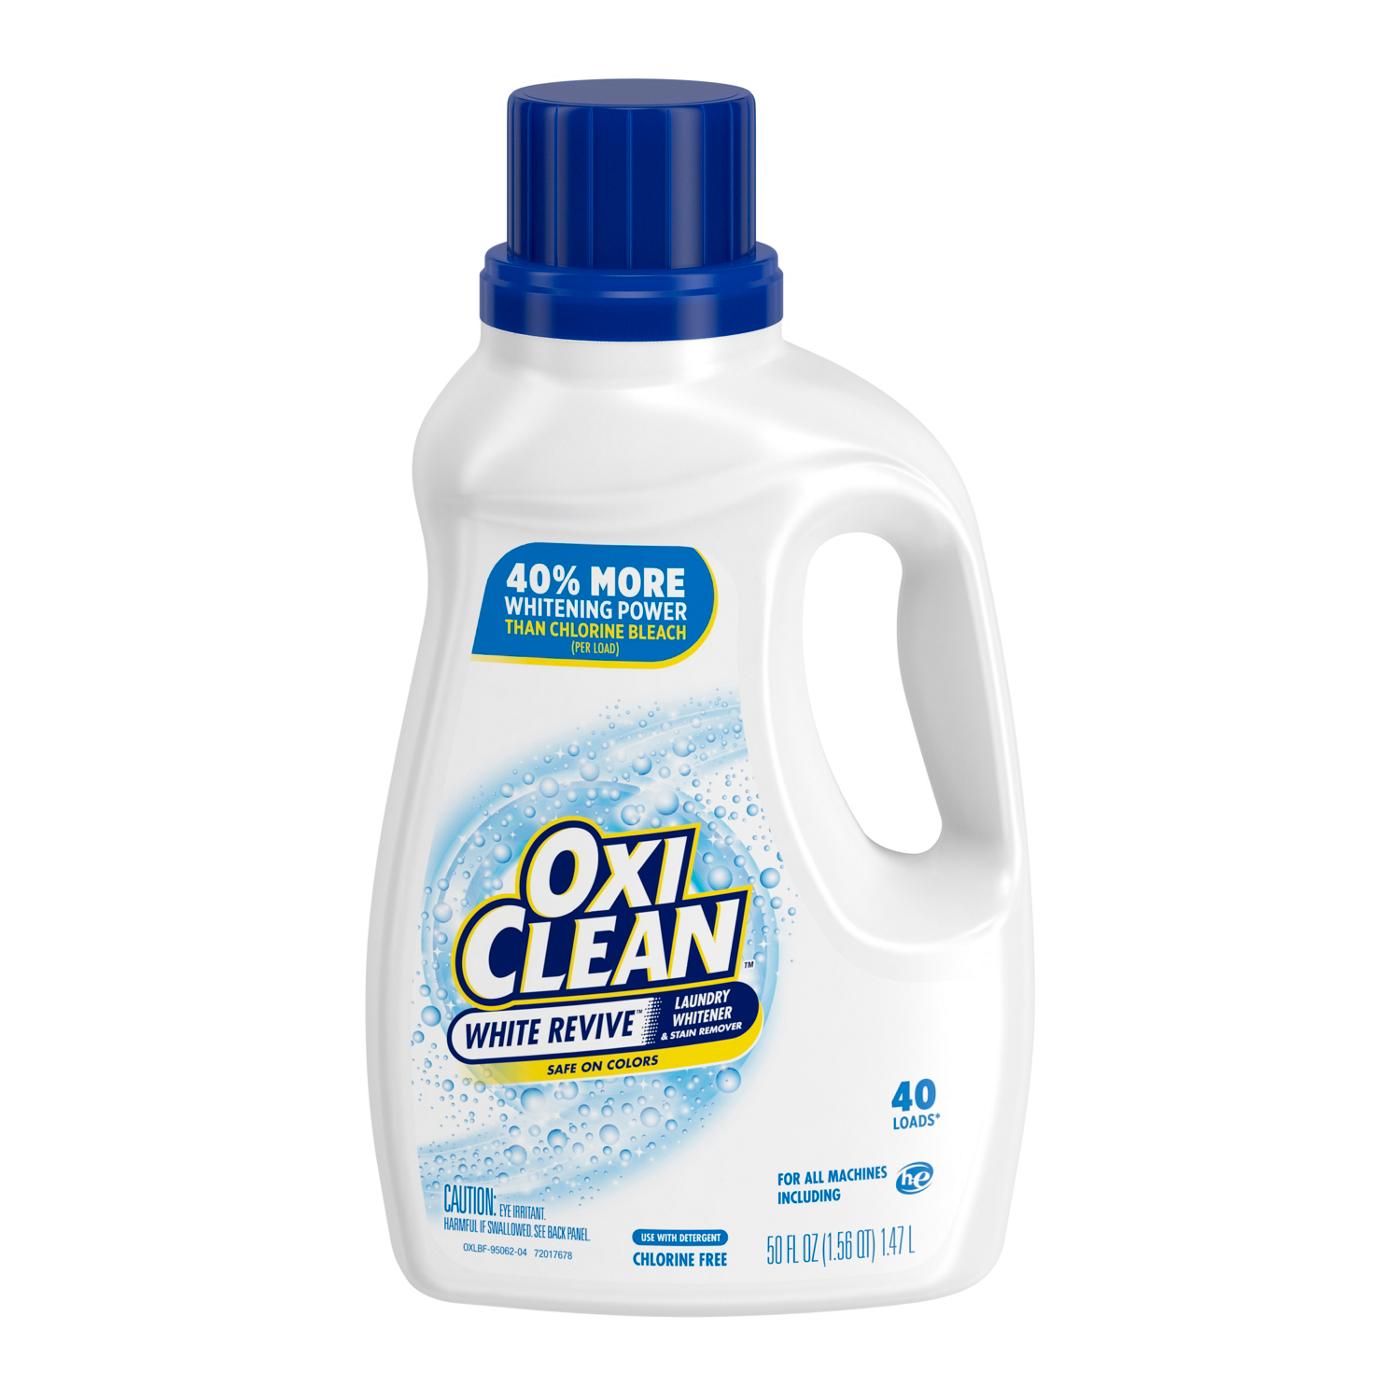 OxiClean White Revive HE Laundry Whitener & Stain Remover 40 Loads; image 1 of 2